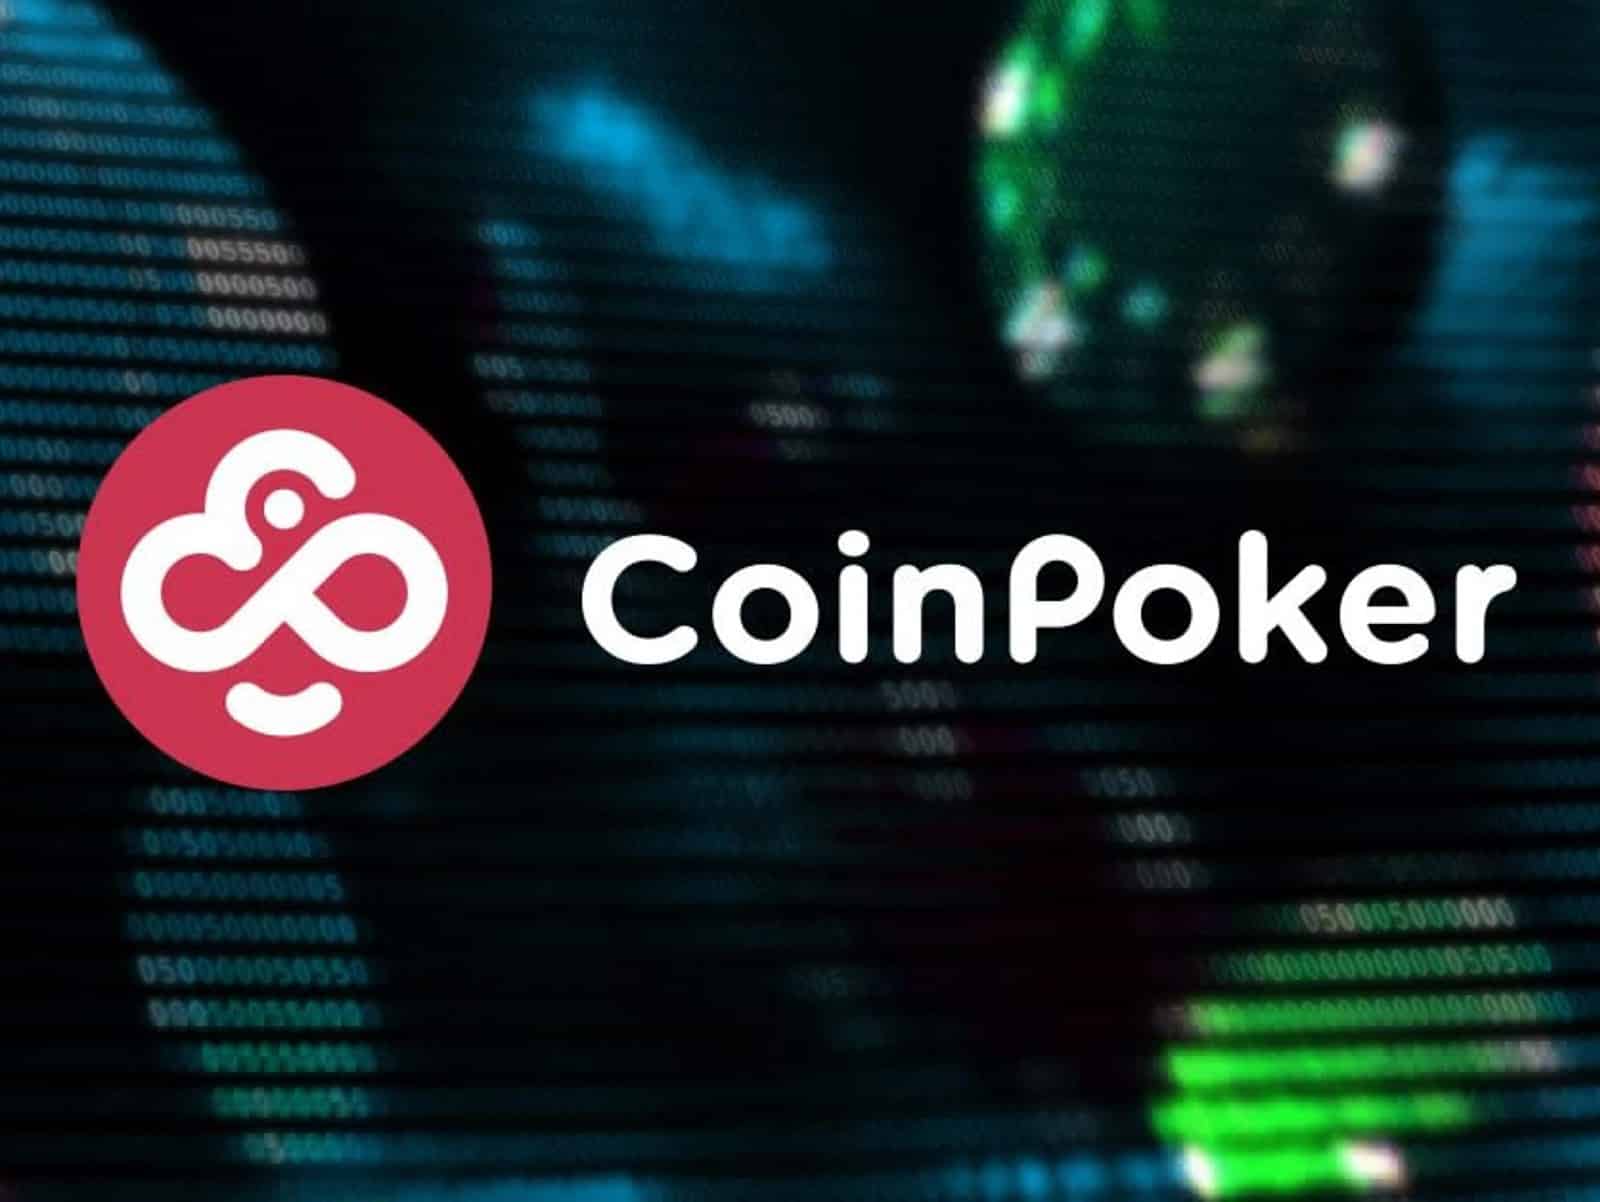 CoinPoker - Cryptocurrencies | IQ.wiki